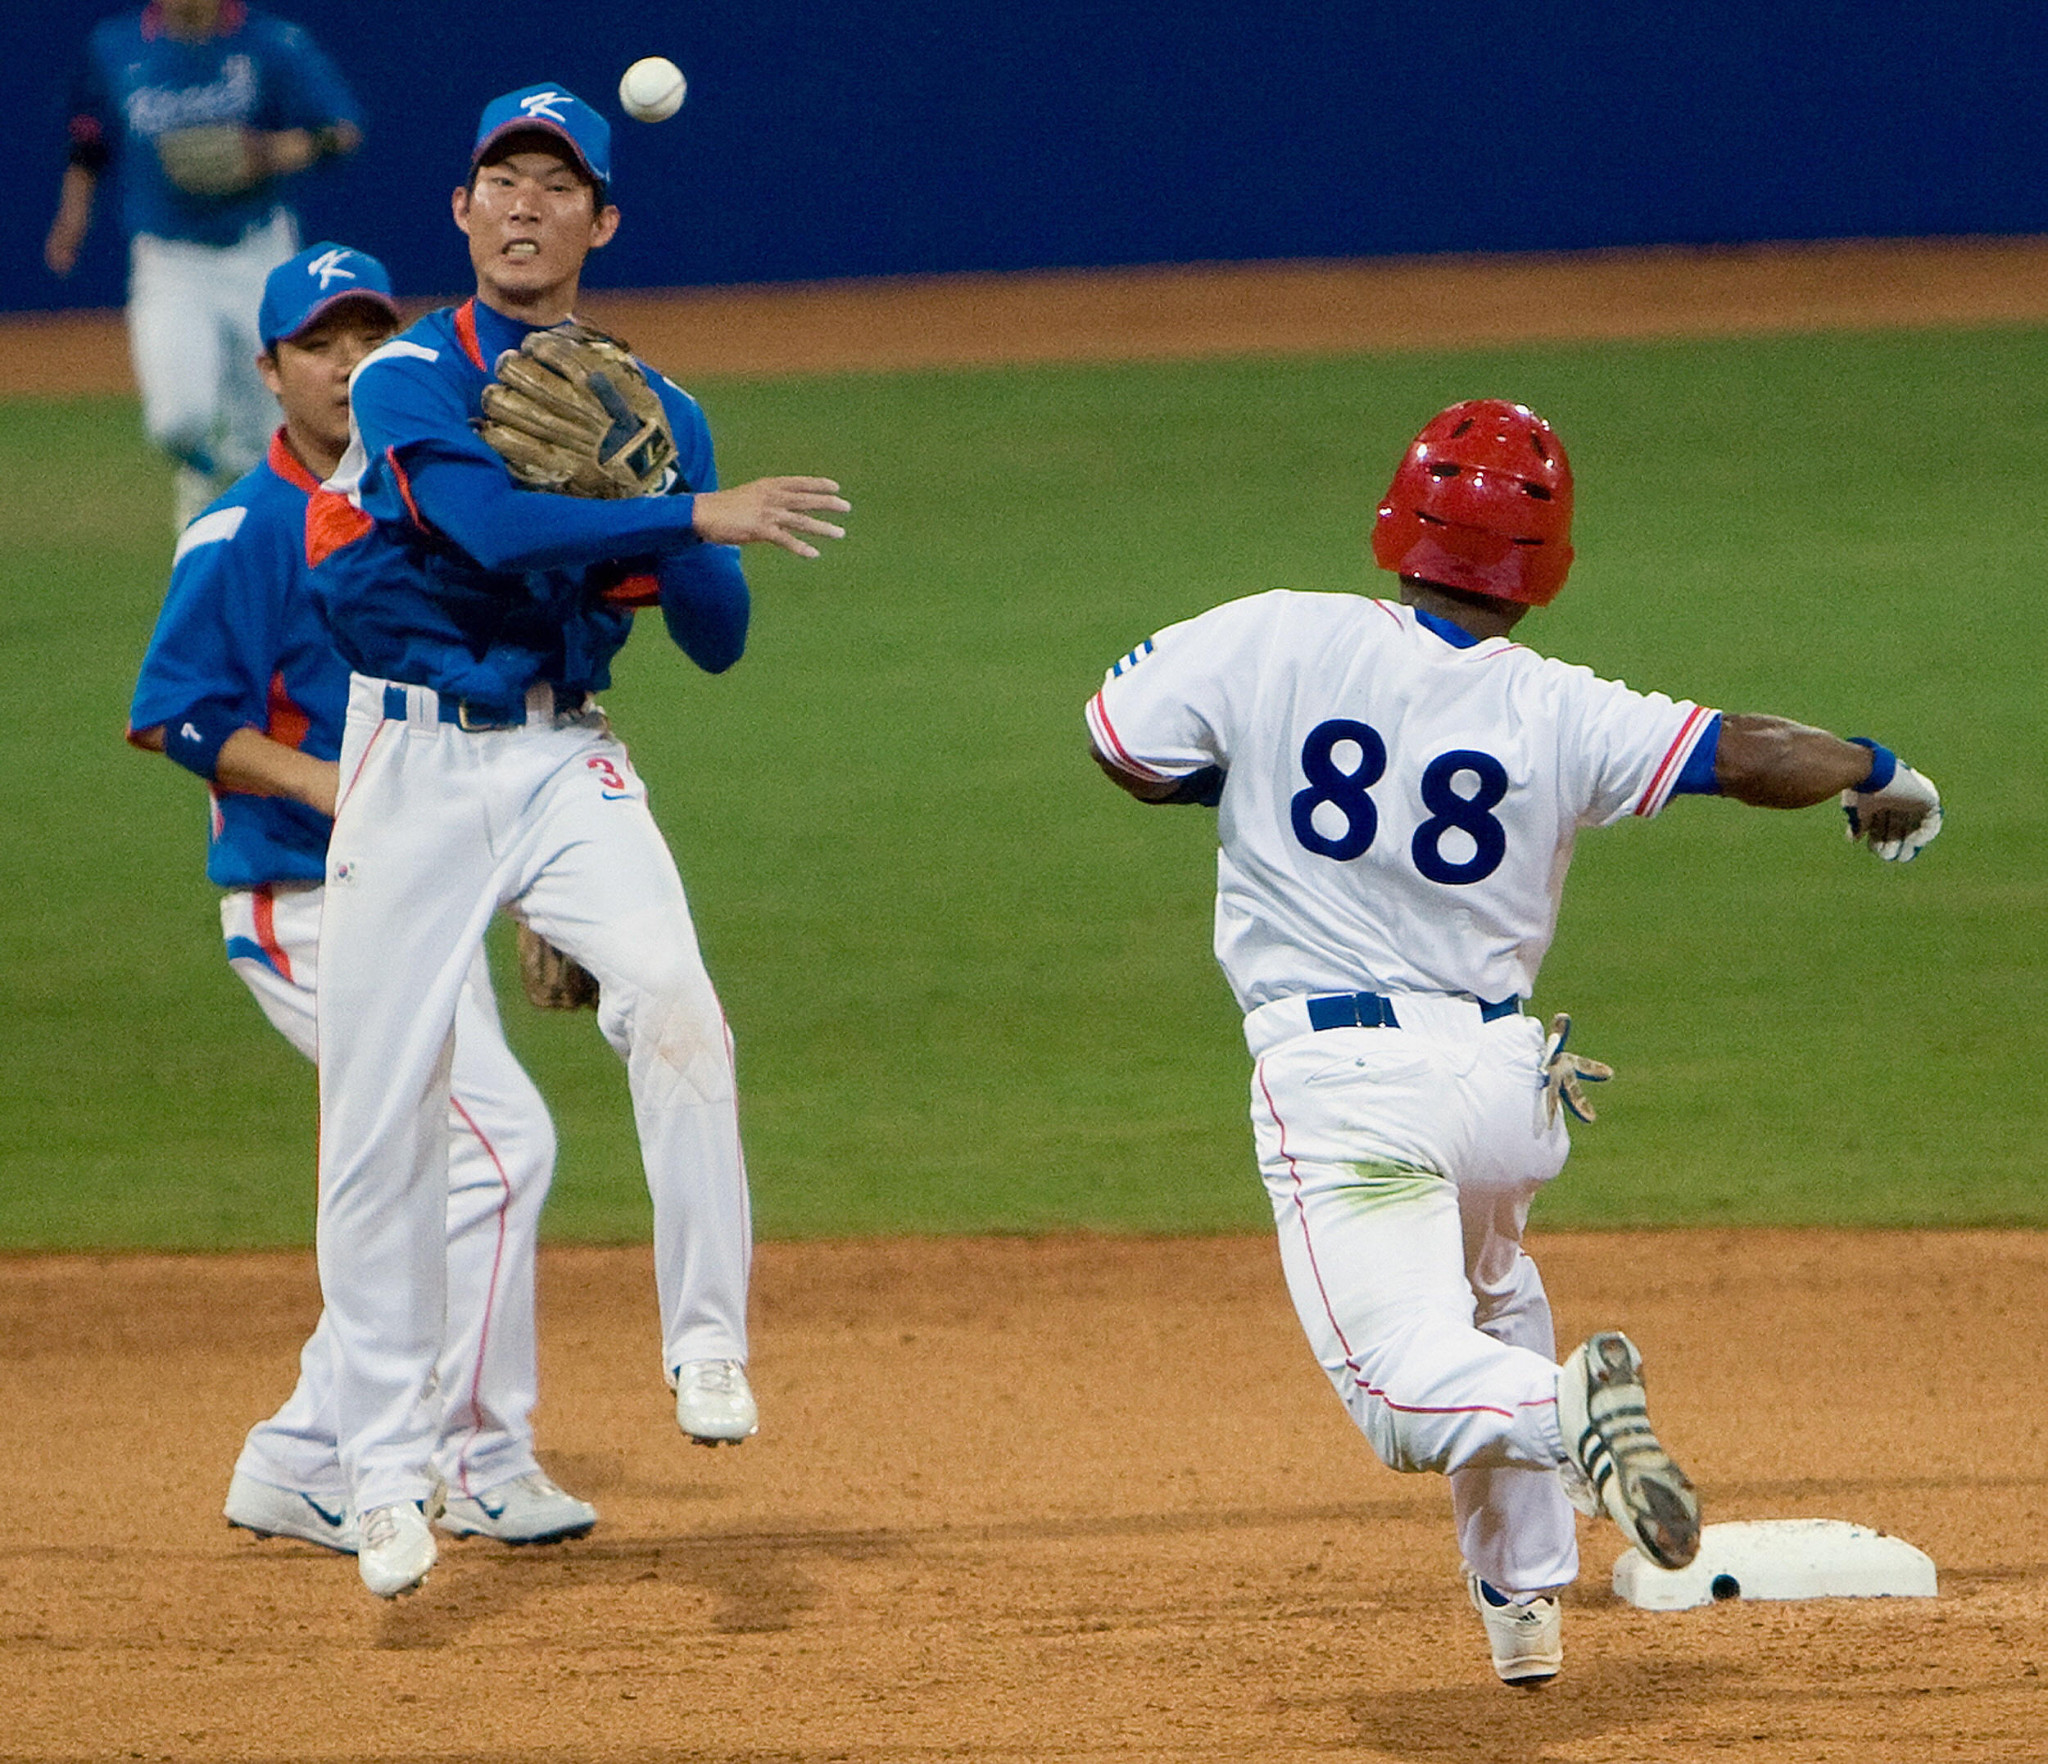 Baseball last featured at the Olympic Games at Beijing 2008 ©Getty Images